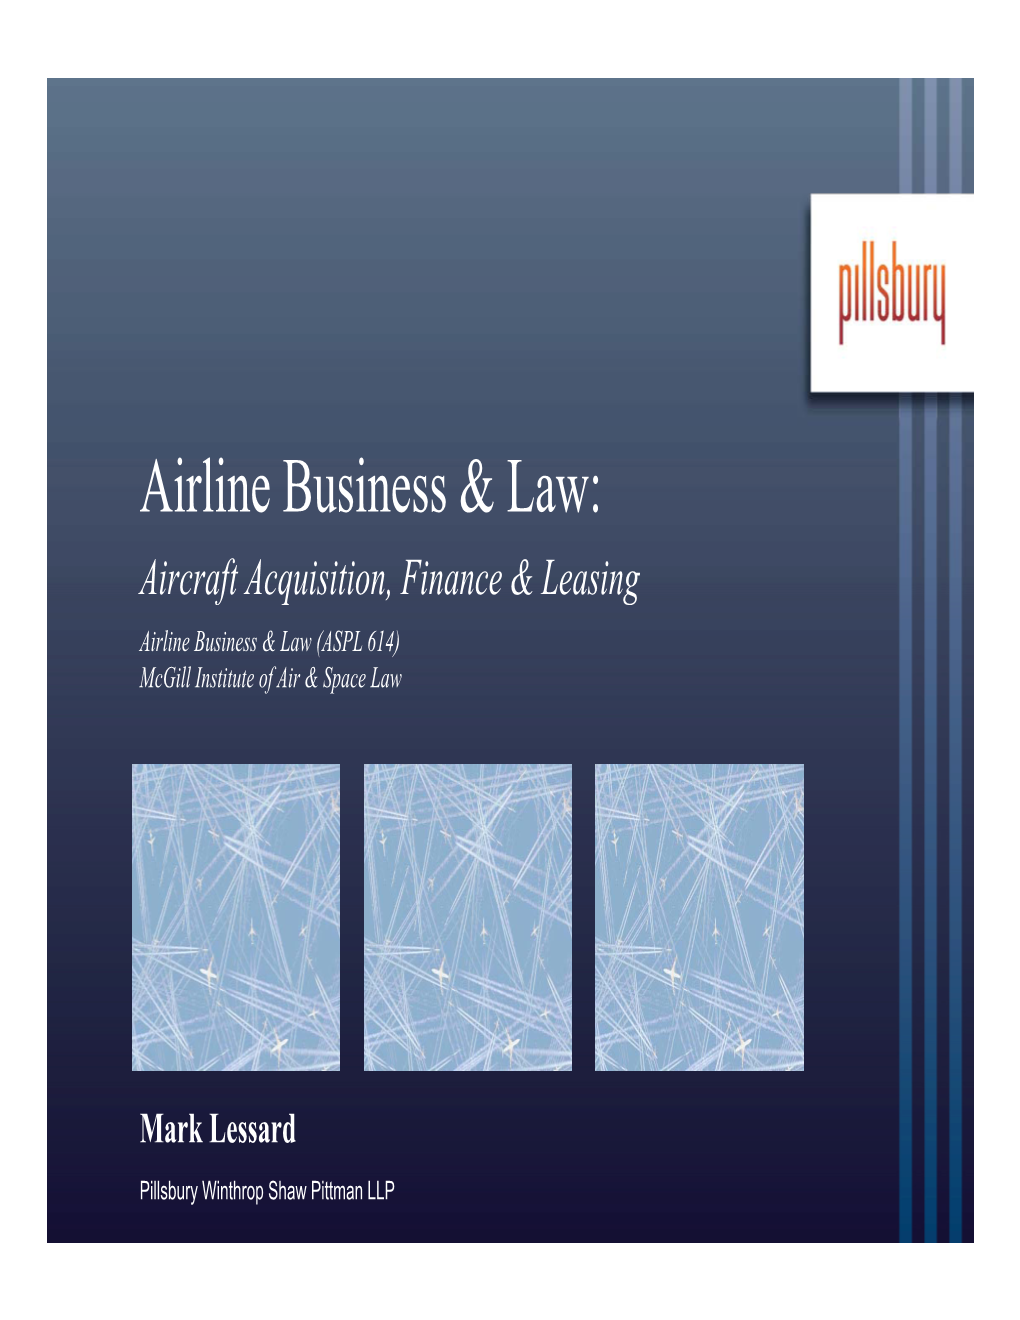 Airline Business & Law: Aircraft Acquisition, Finance & Leasing